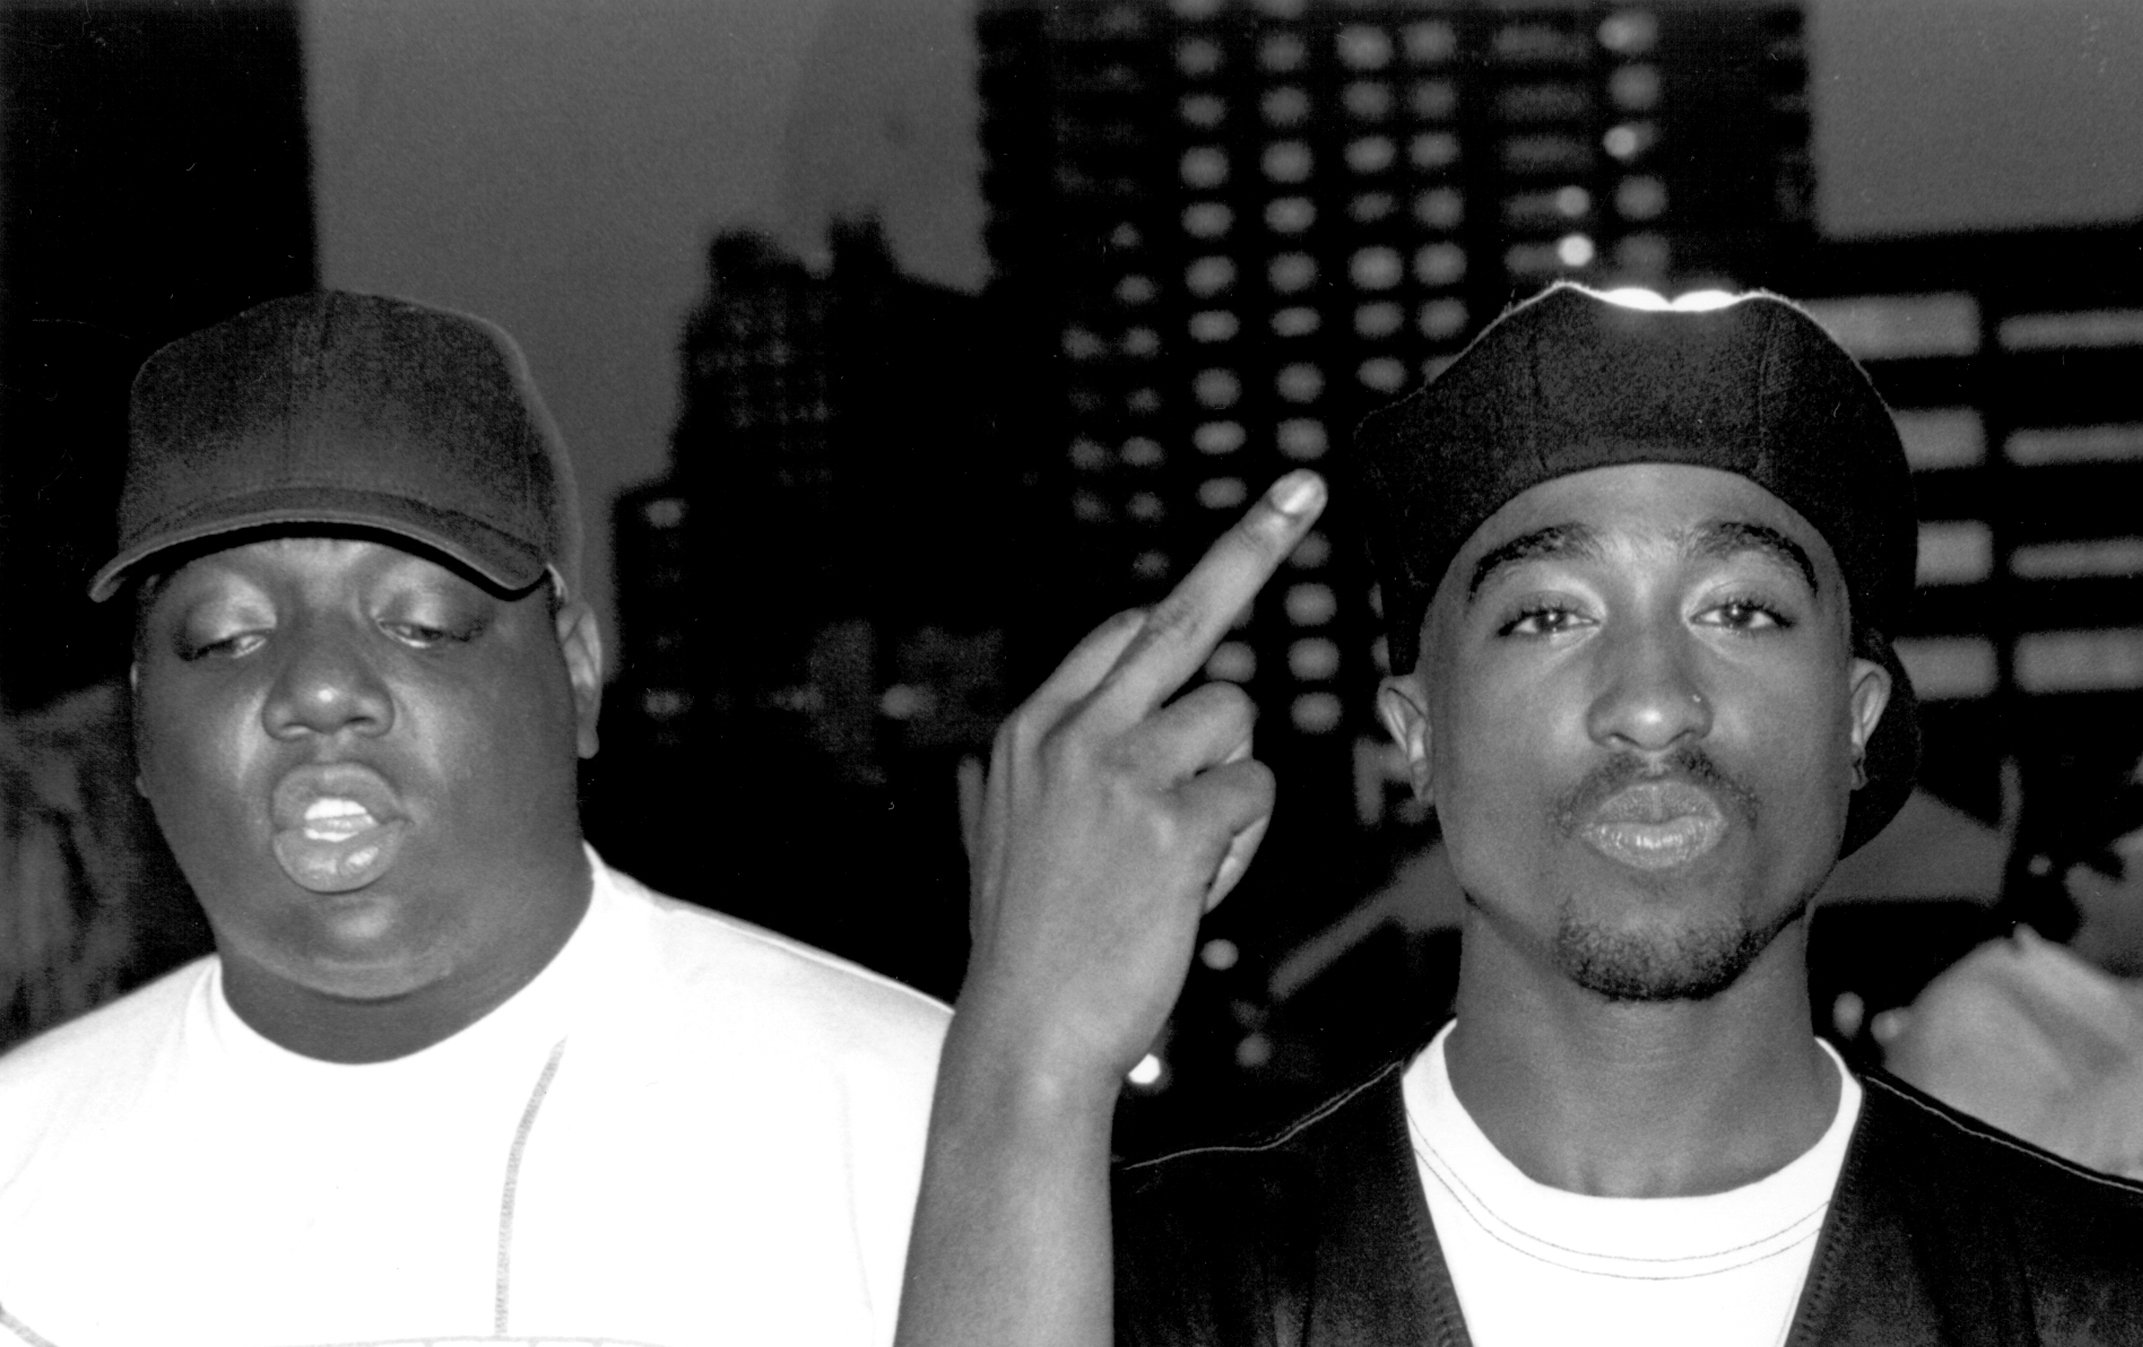 The Notorious B.I.G., who once gifted Tupac Shakur flowers and a gun, posing with Tupac Shakur